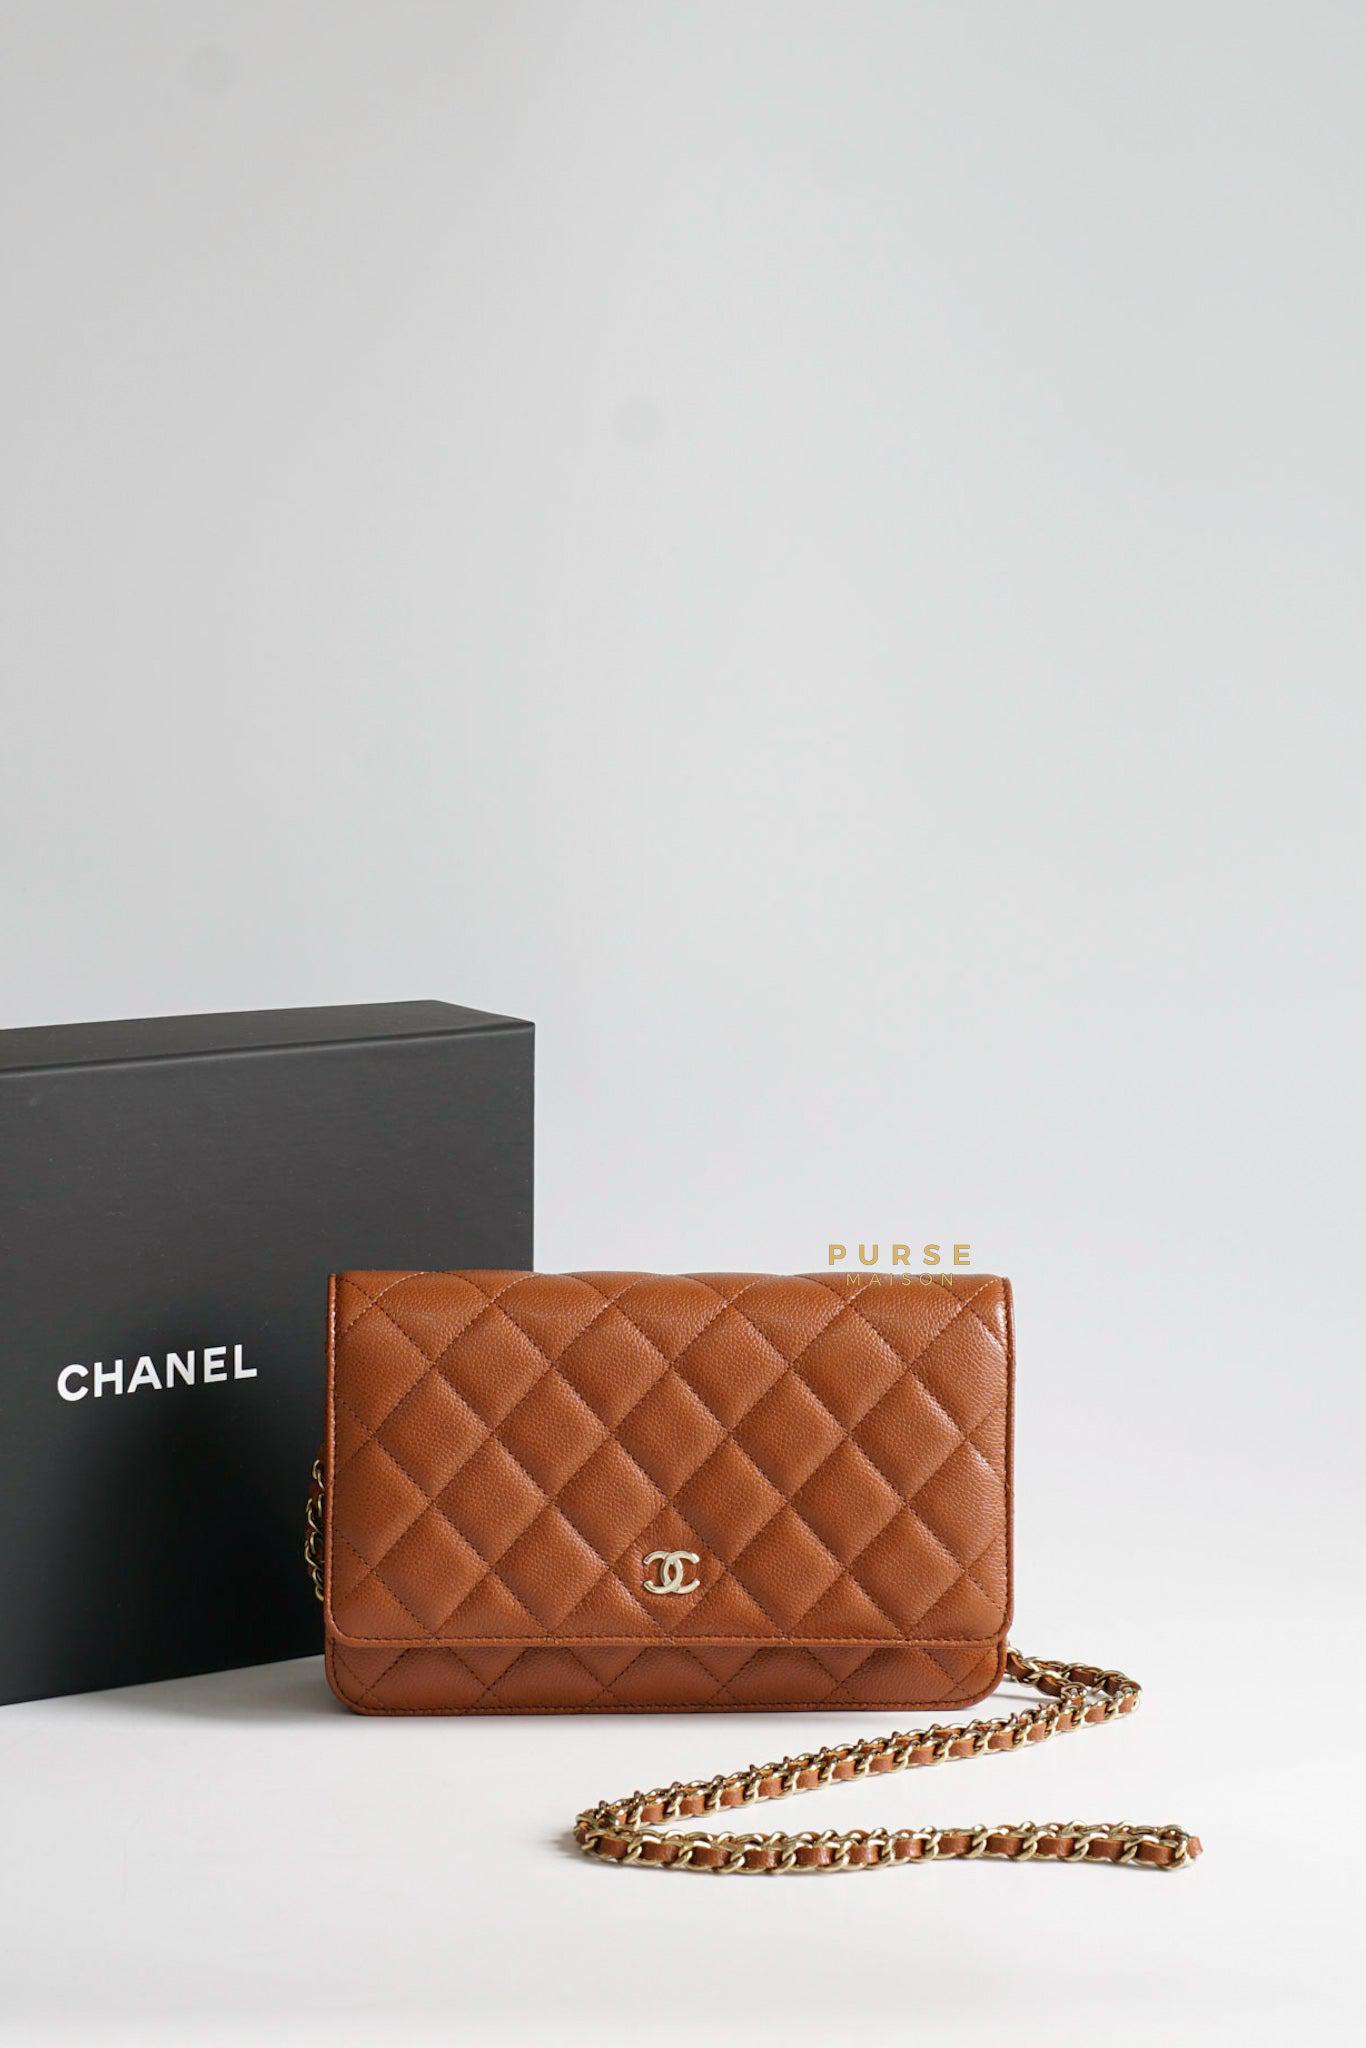 Chanel Black Quilted Calfskin Lucky Charms Reissue 2.55 226 Flap Bag, myGemma